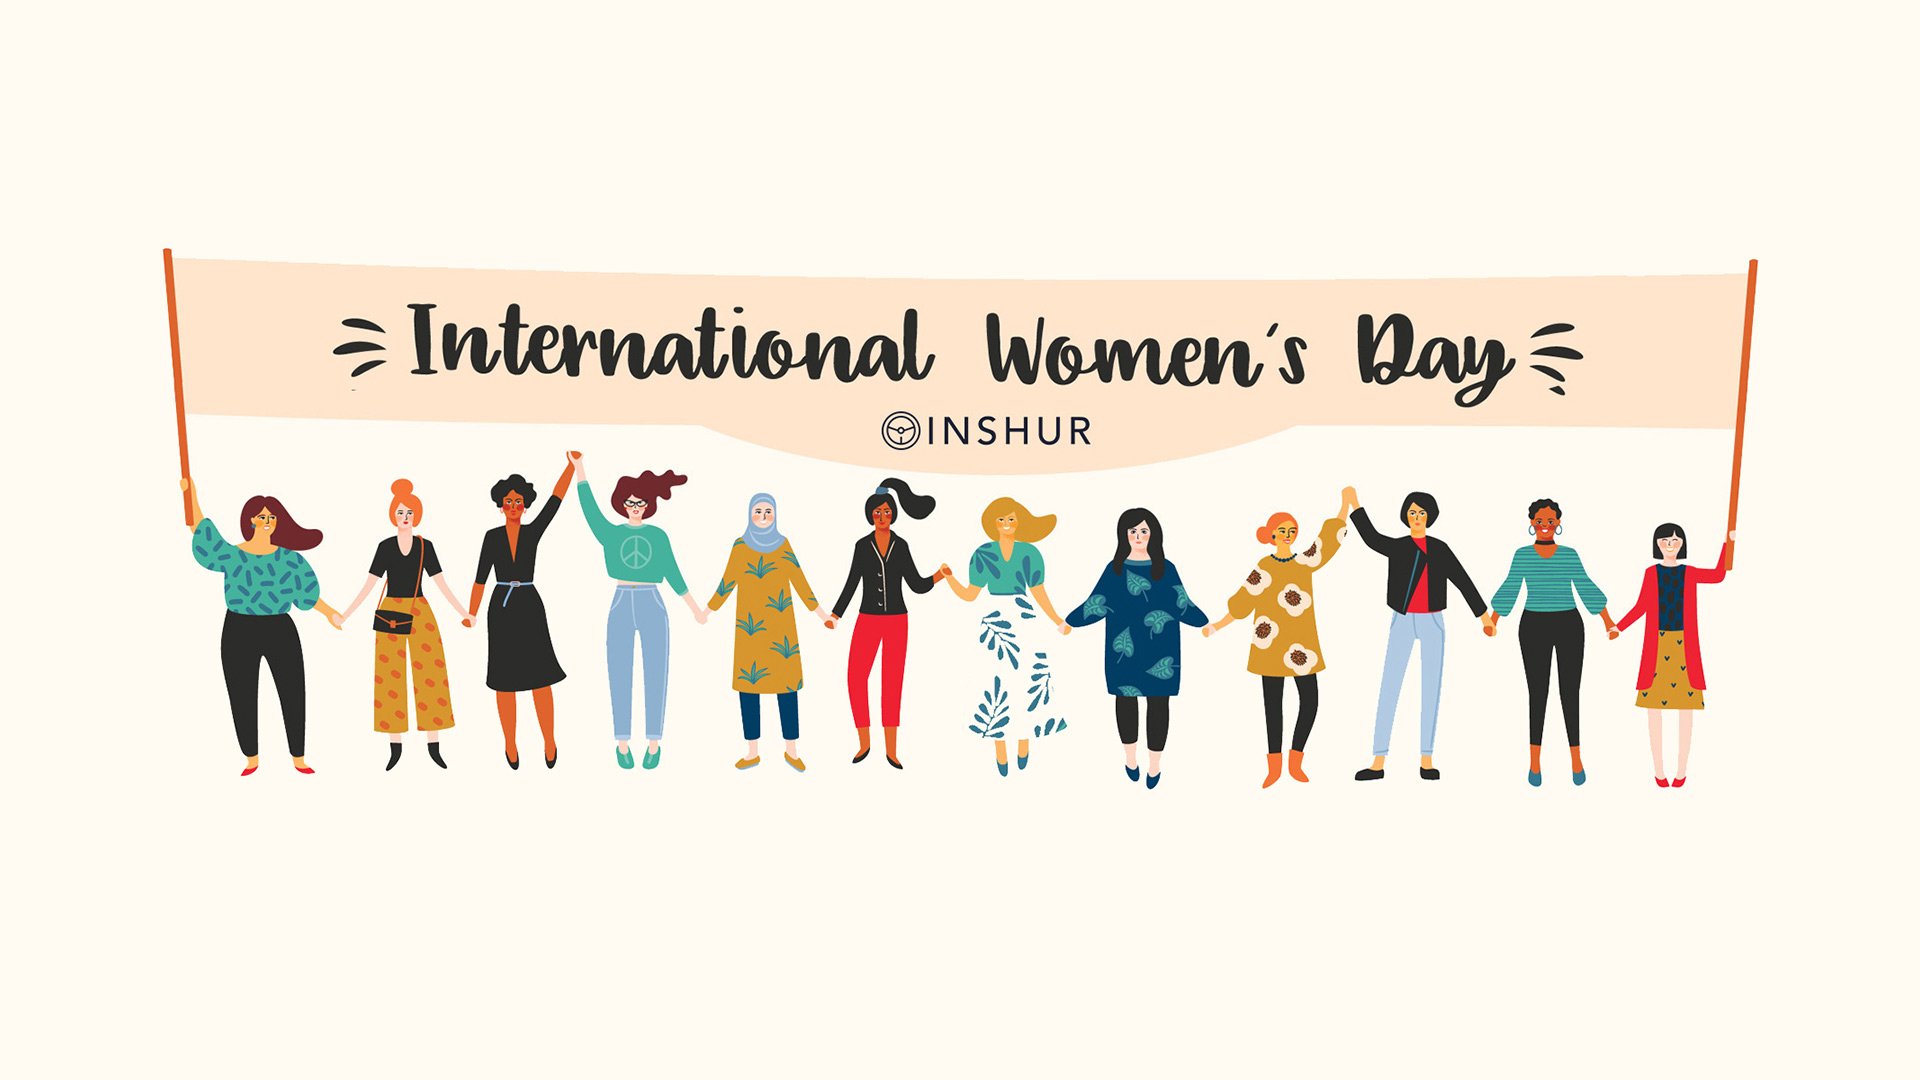 International Women’s Day: Our team reflects on womanhood